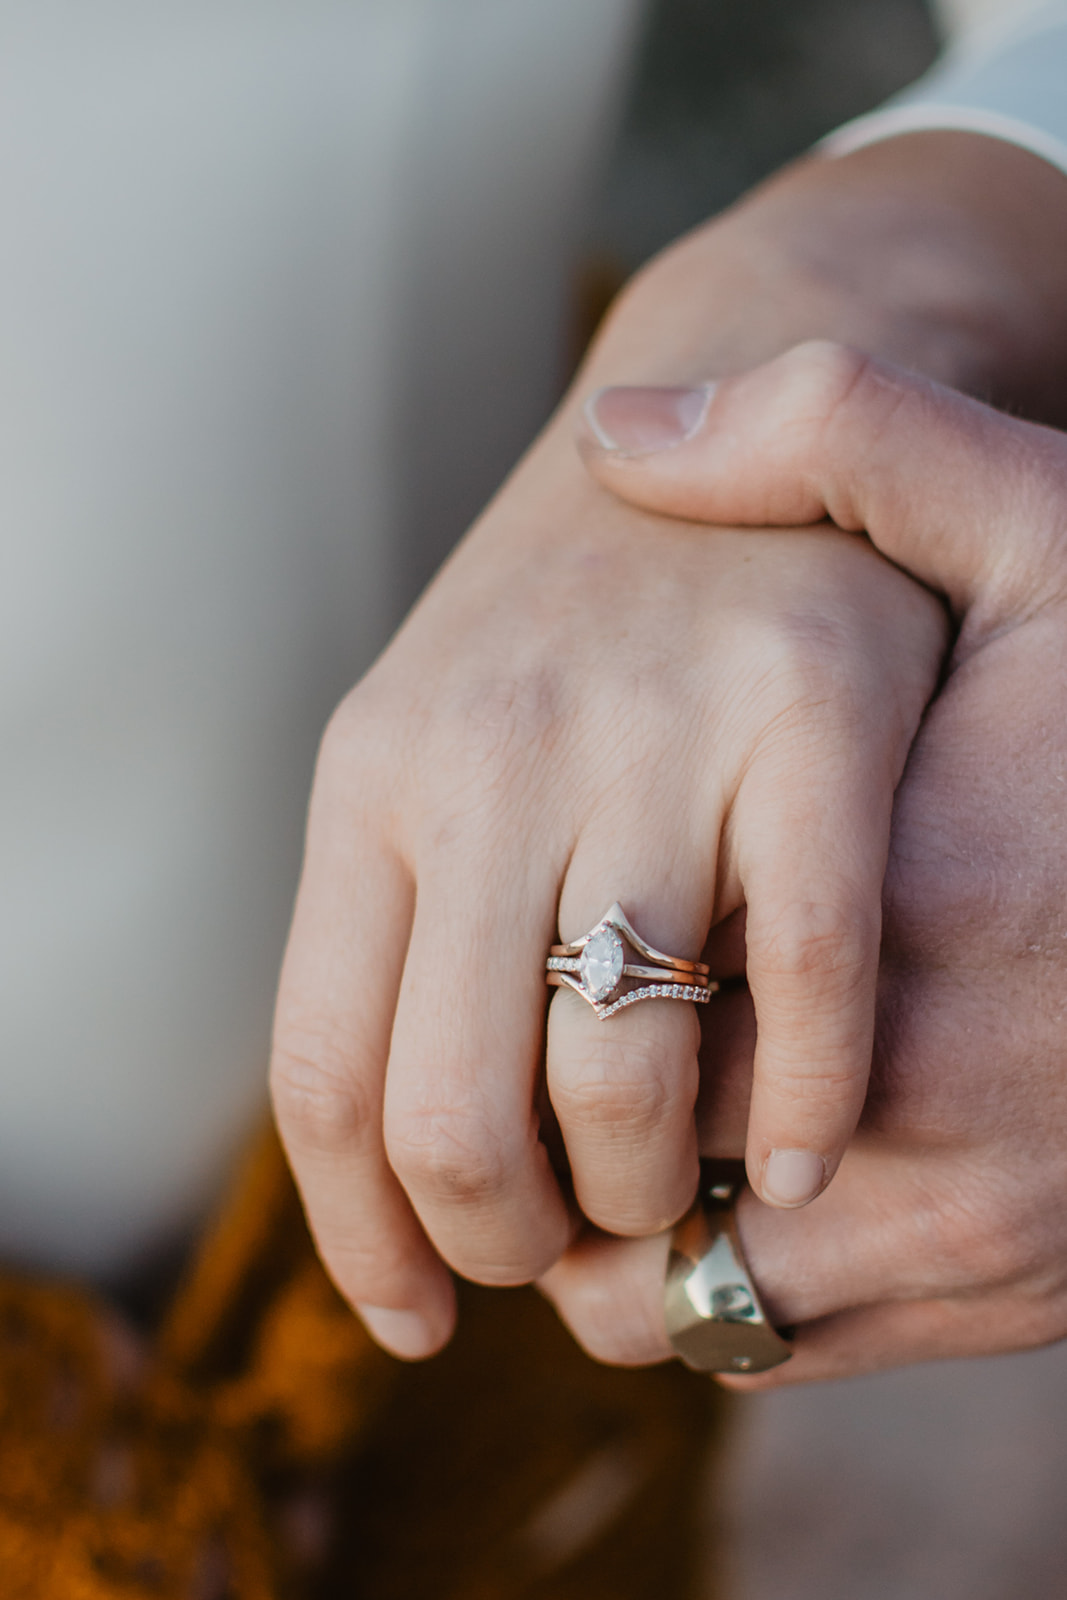 stunning engagement and wedding ring captured while eloping in Moab taken by best Moab elopement photographer